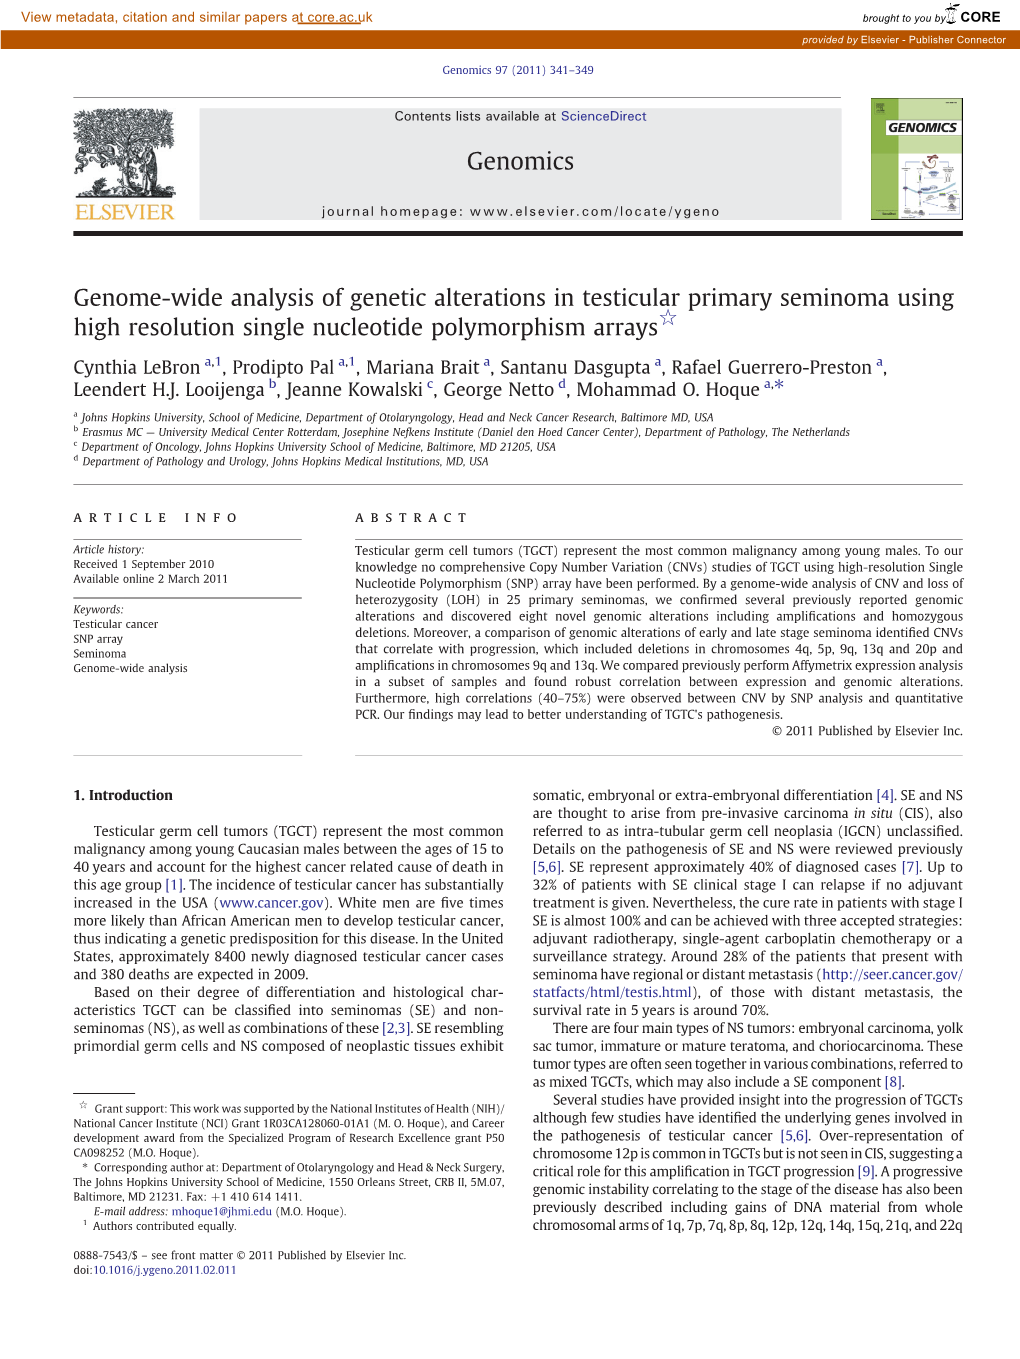 Genome-Wide Analysis of Genetic Alterations in Testicular Primary Seminoma Using High Resolution Single Nucleotide Polymorphism Arrays☆